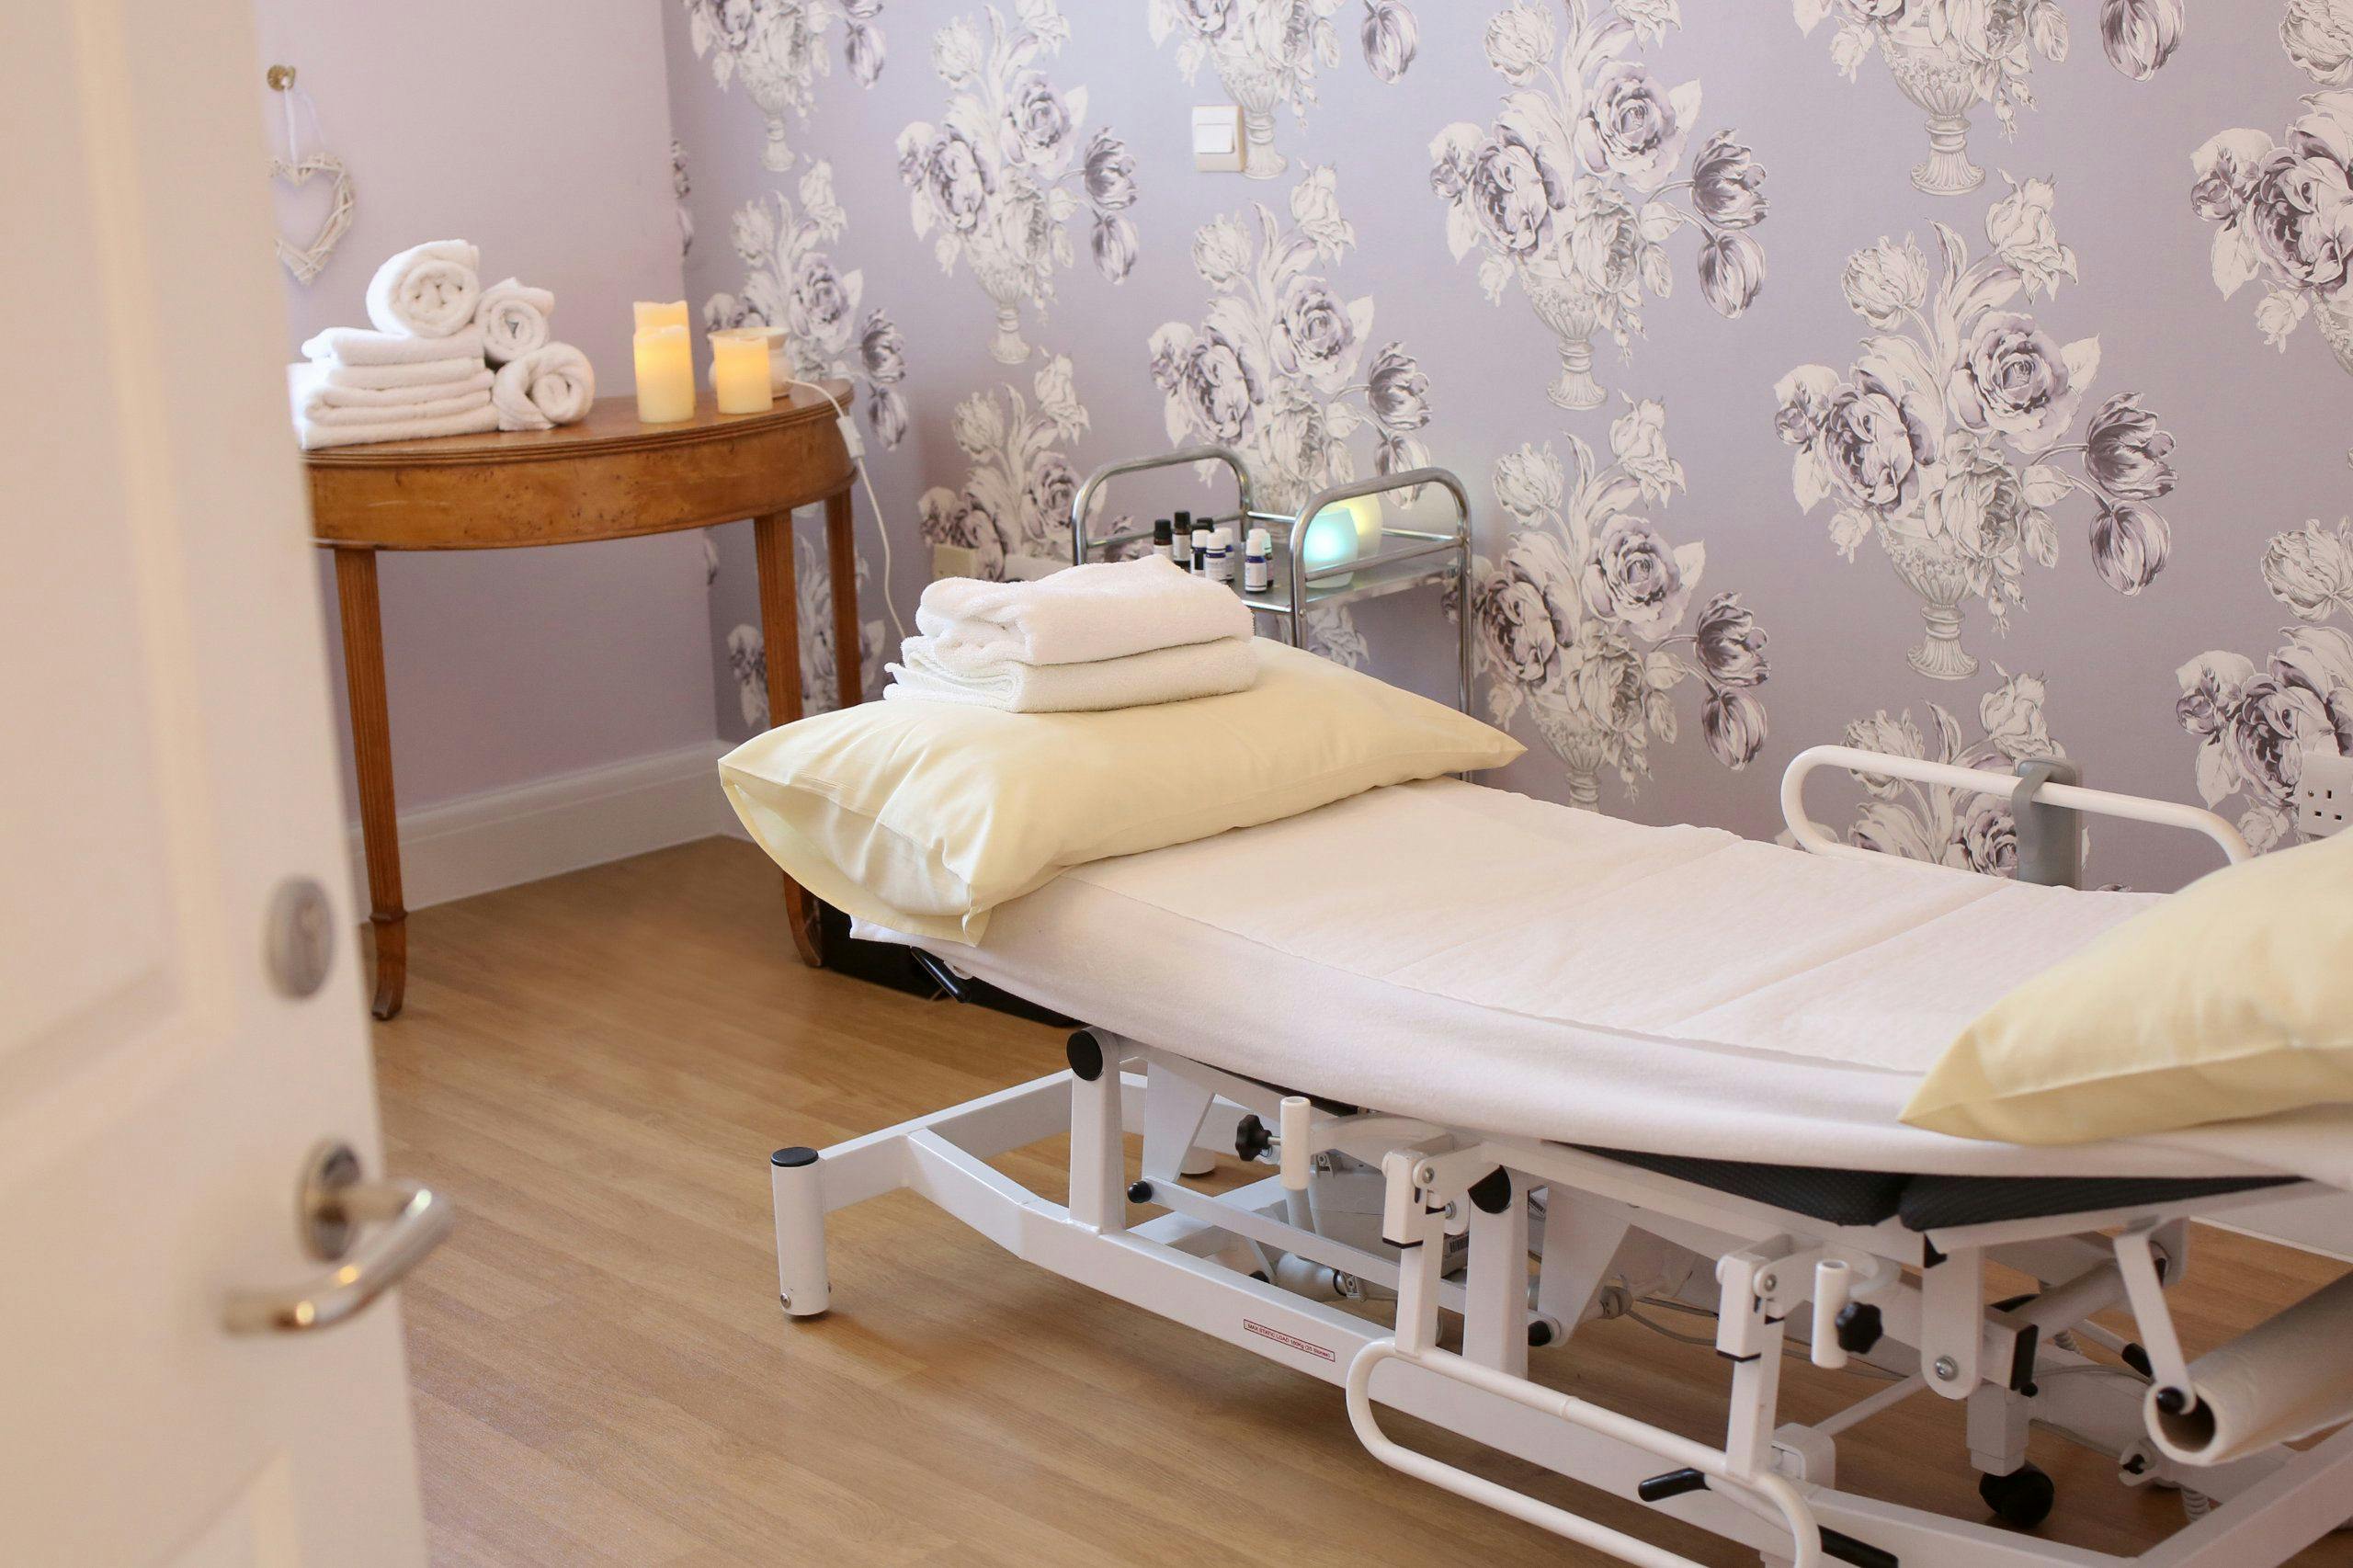 Therapy room at Glebelands Care Home, Wokingham, Berkshire